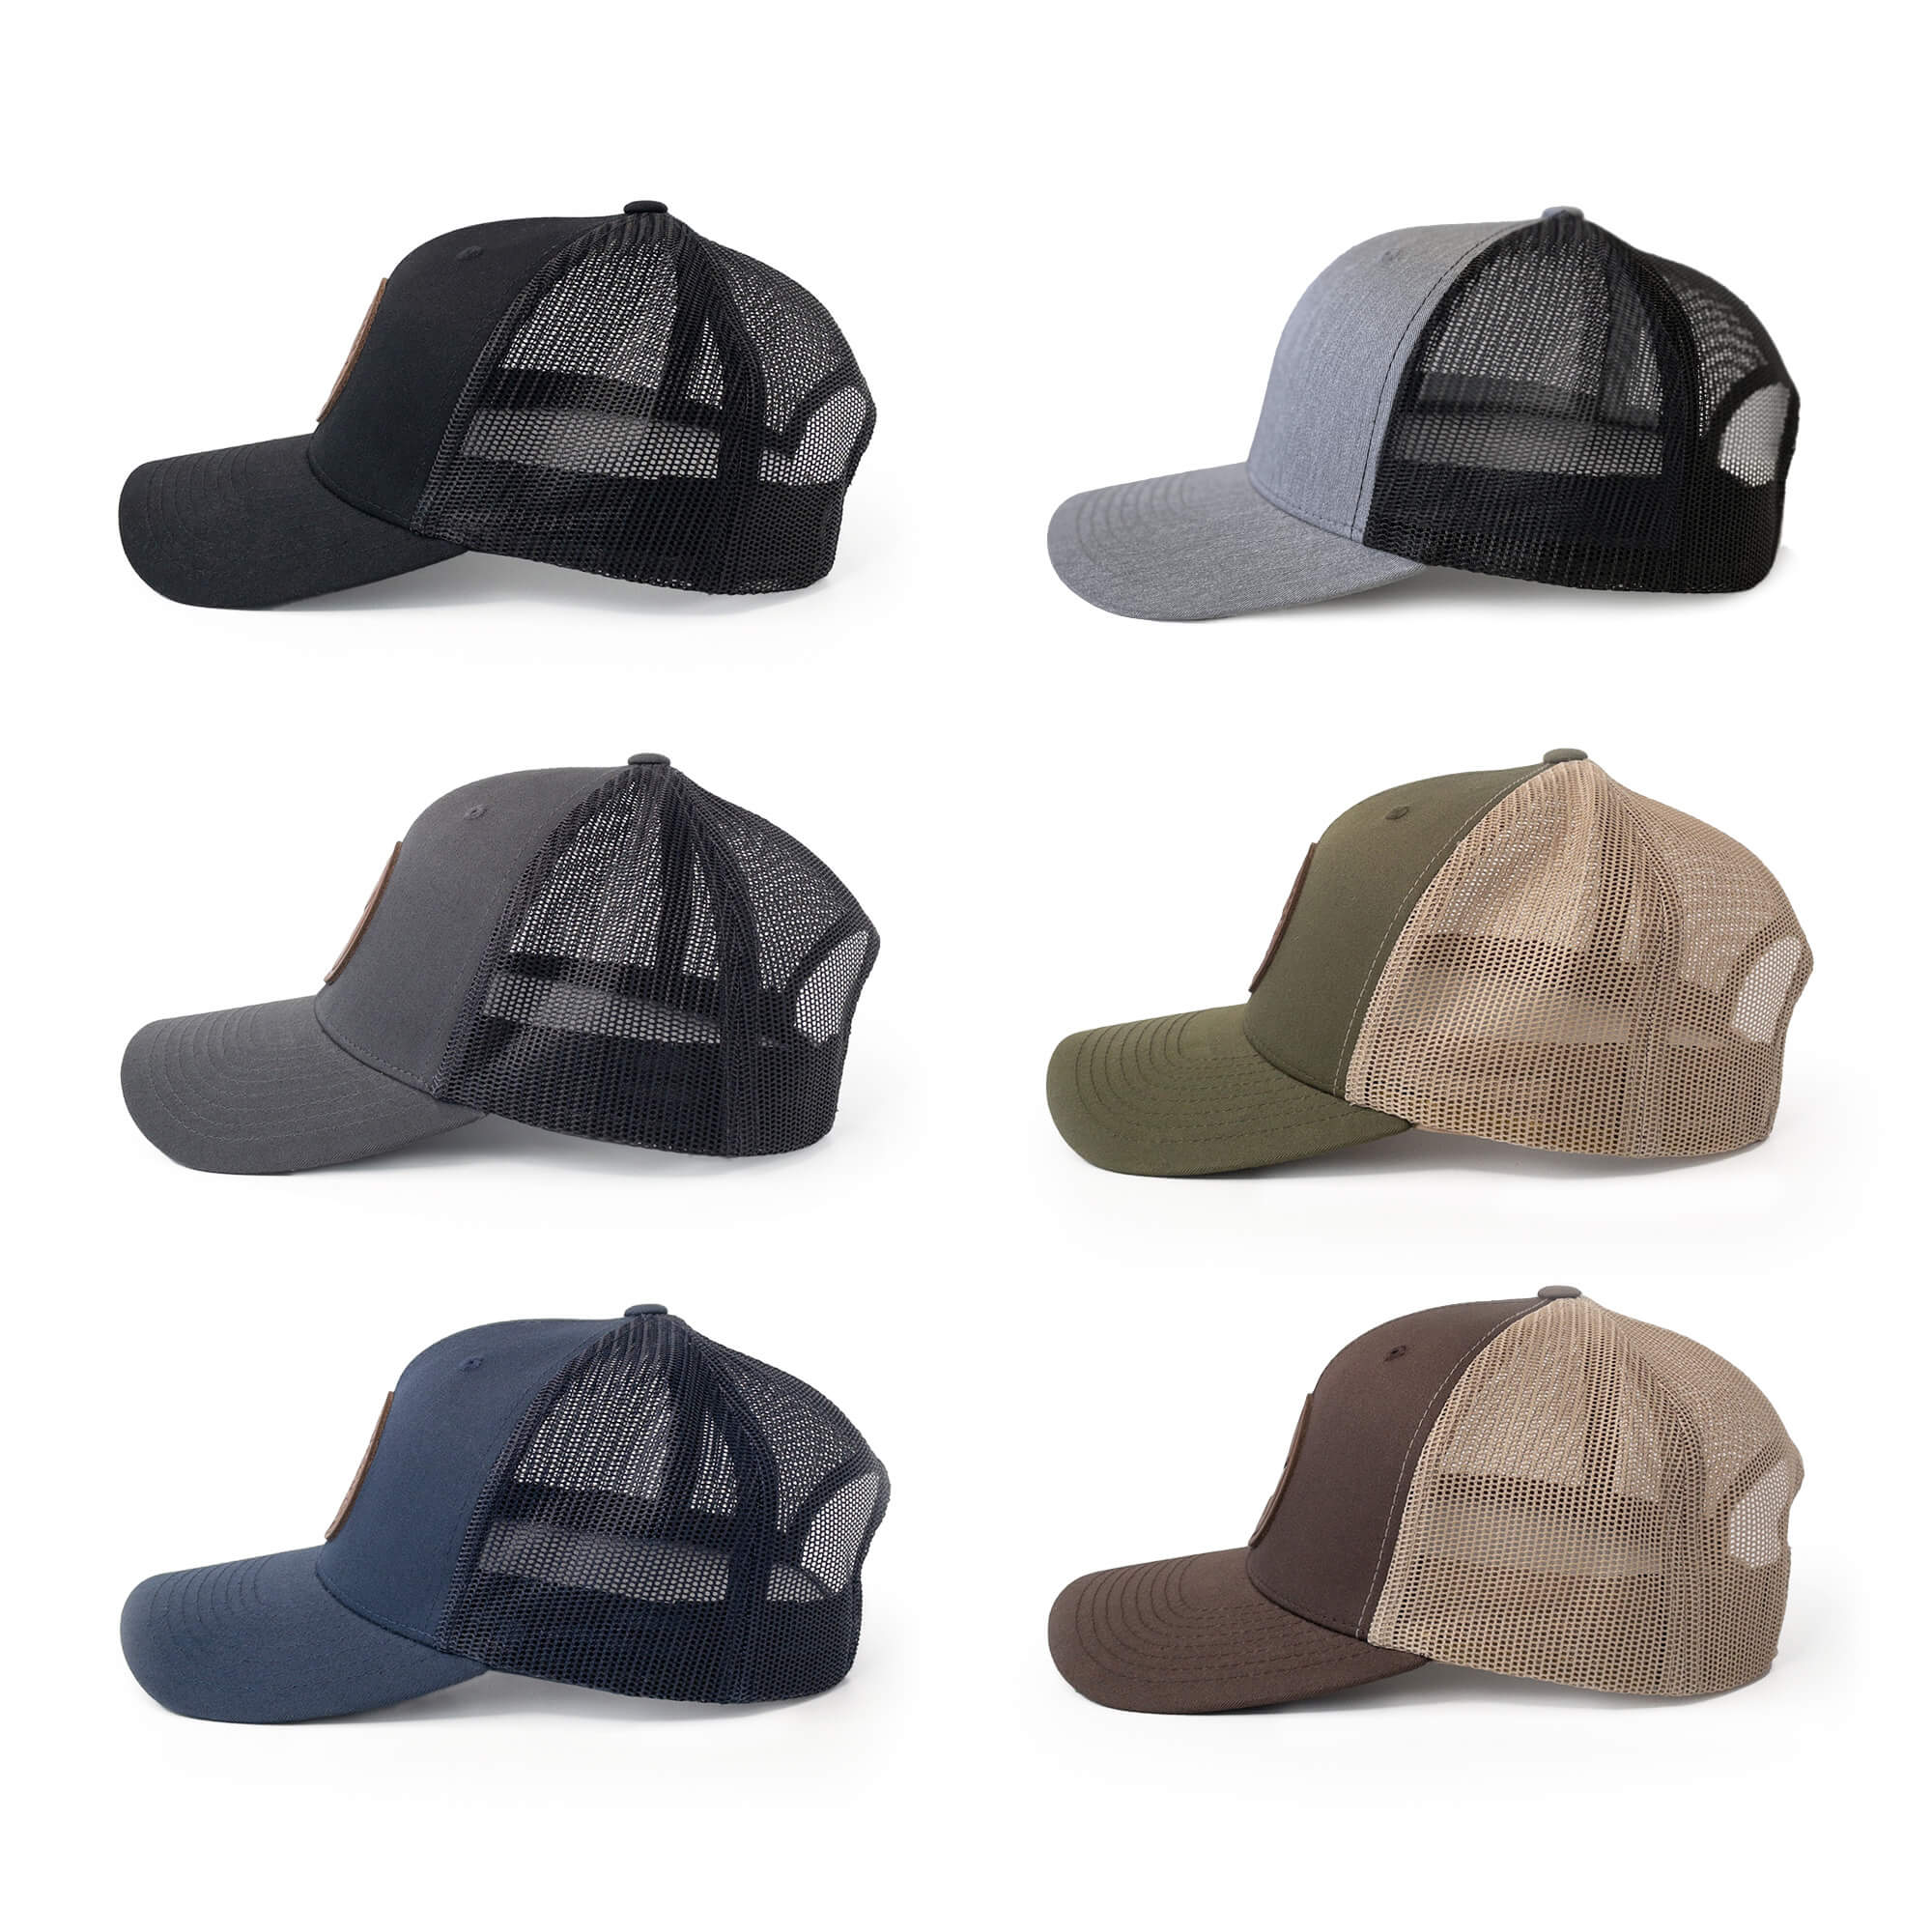 Leather patch trucker hats available in 6 colors | BLACK-003-010, CHARC-003-010, NAVY-003-010, HGREY-003-010, MOSS-003-010, BROWN-003-010